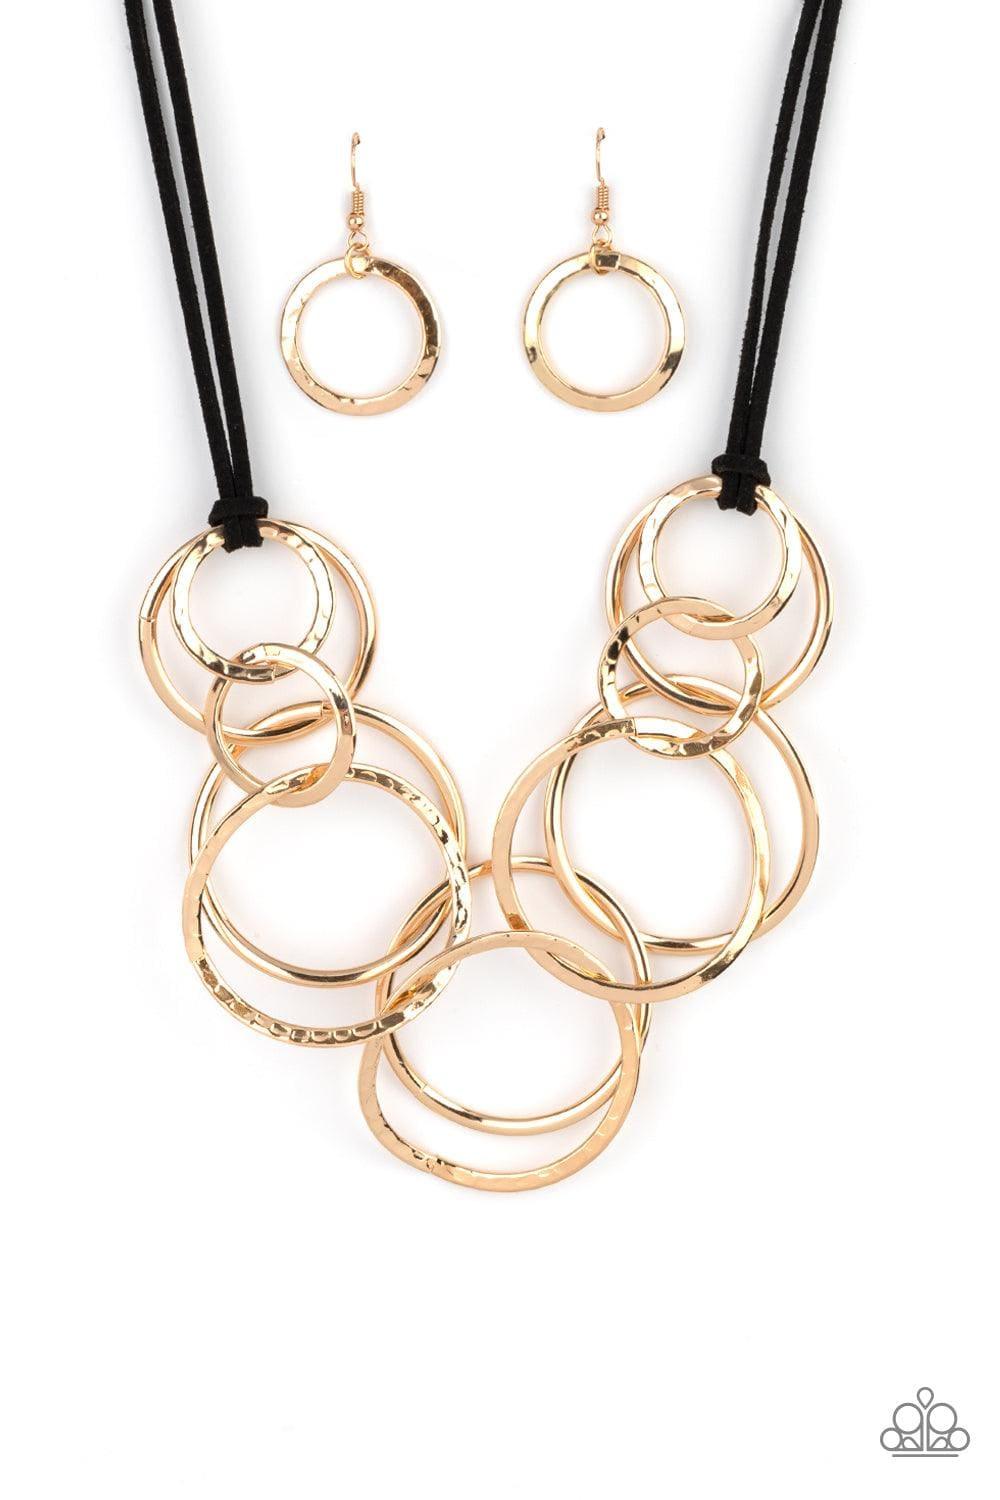 Paparazzi Accessories - Spiraling Out Of Couture - Gold Necklace - Bling by JessieK